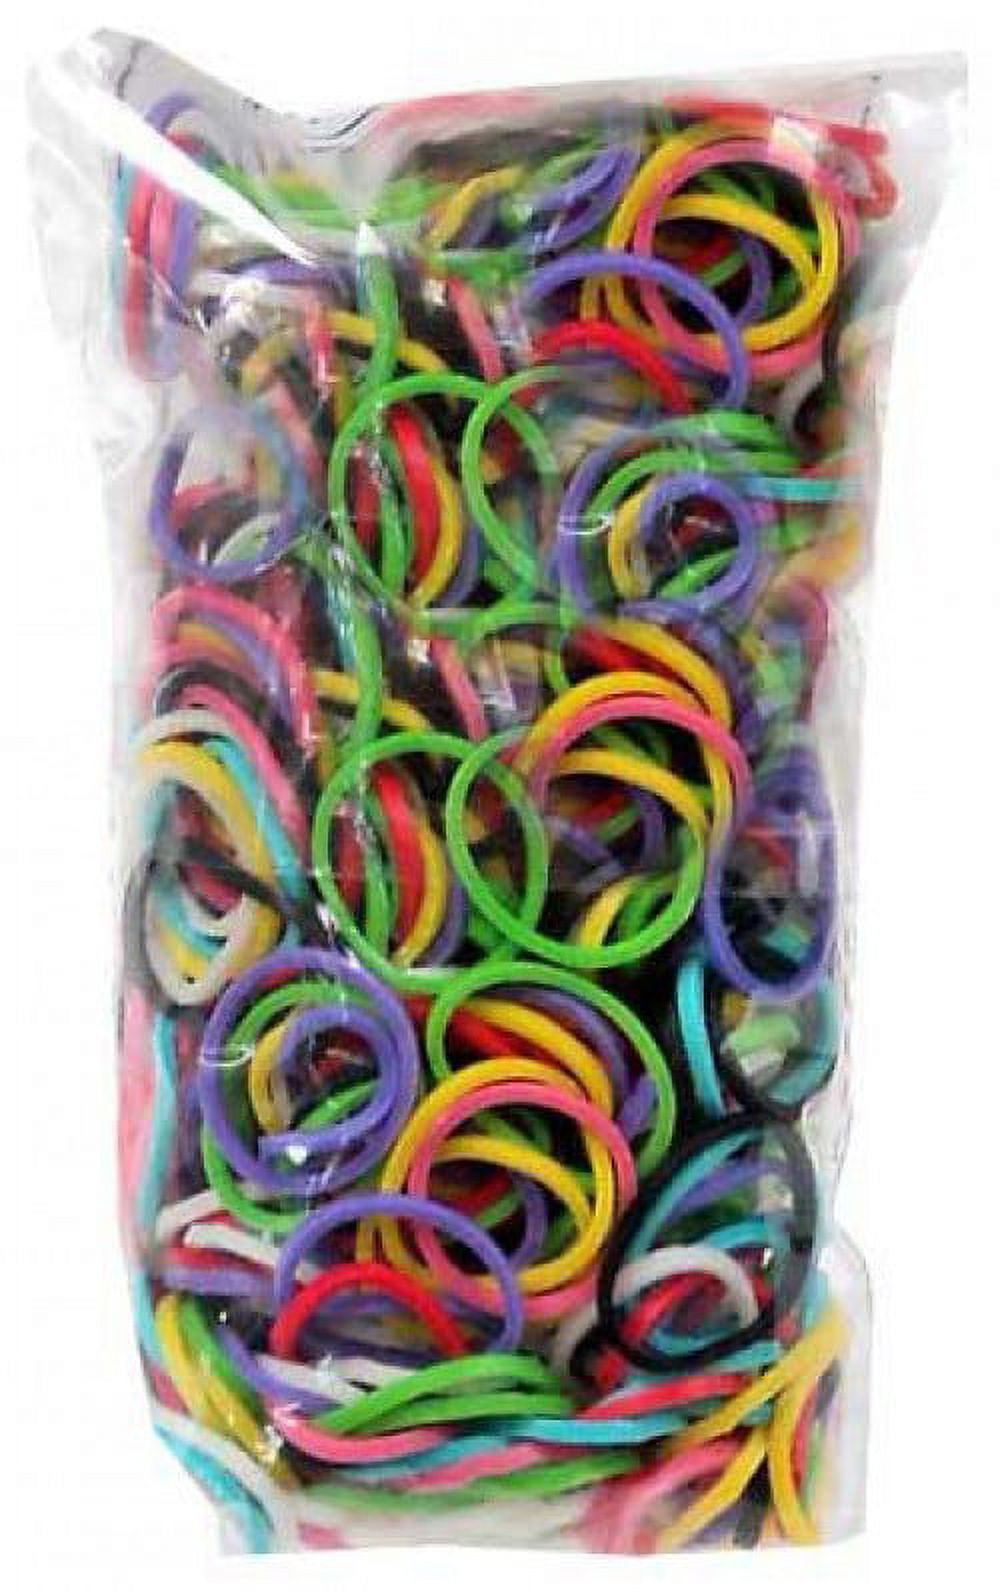 Rainbow Loom Persian Black Rubber Bands Refill Pack [600 ct]